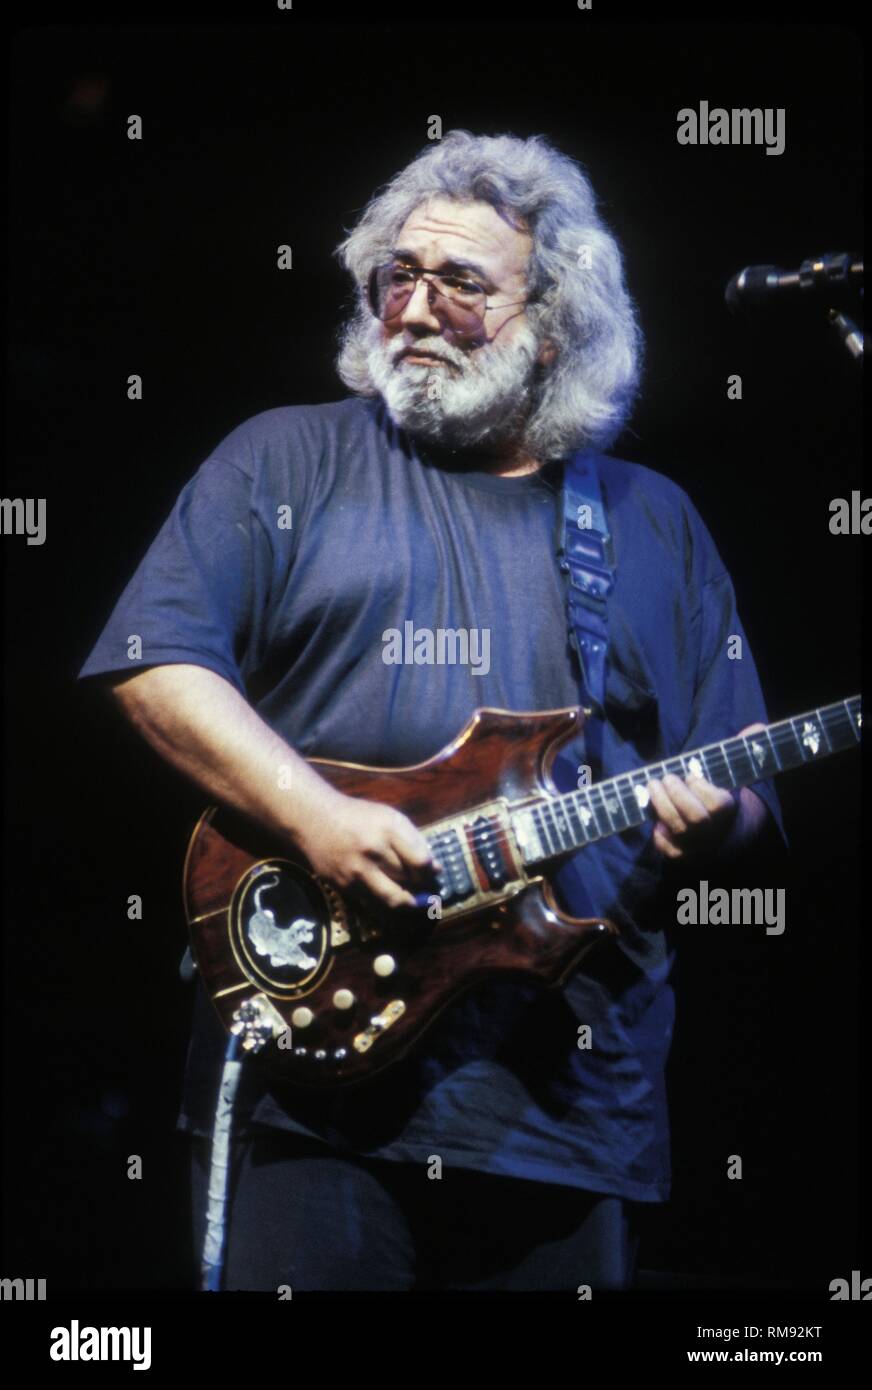 Singer, songwriter and guitarist Jerry Garcia of the Grateful Dead is shown performing on stage during a 'live' concert appearance. Stock Photo